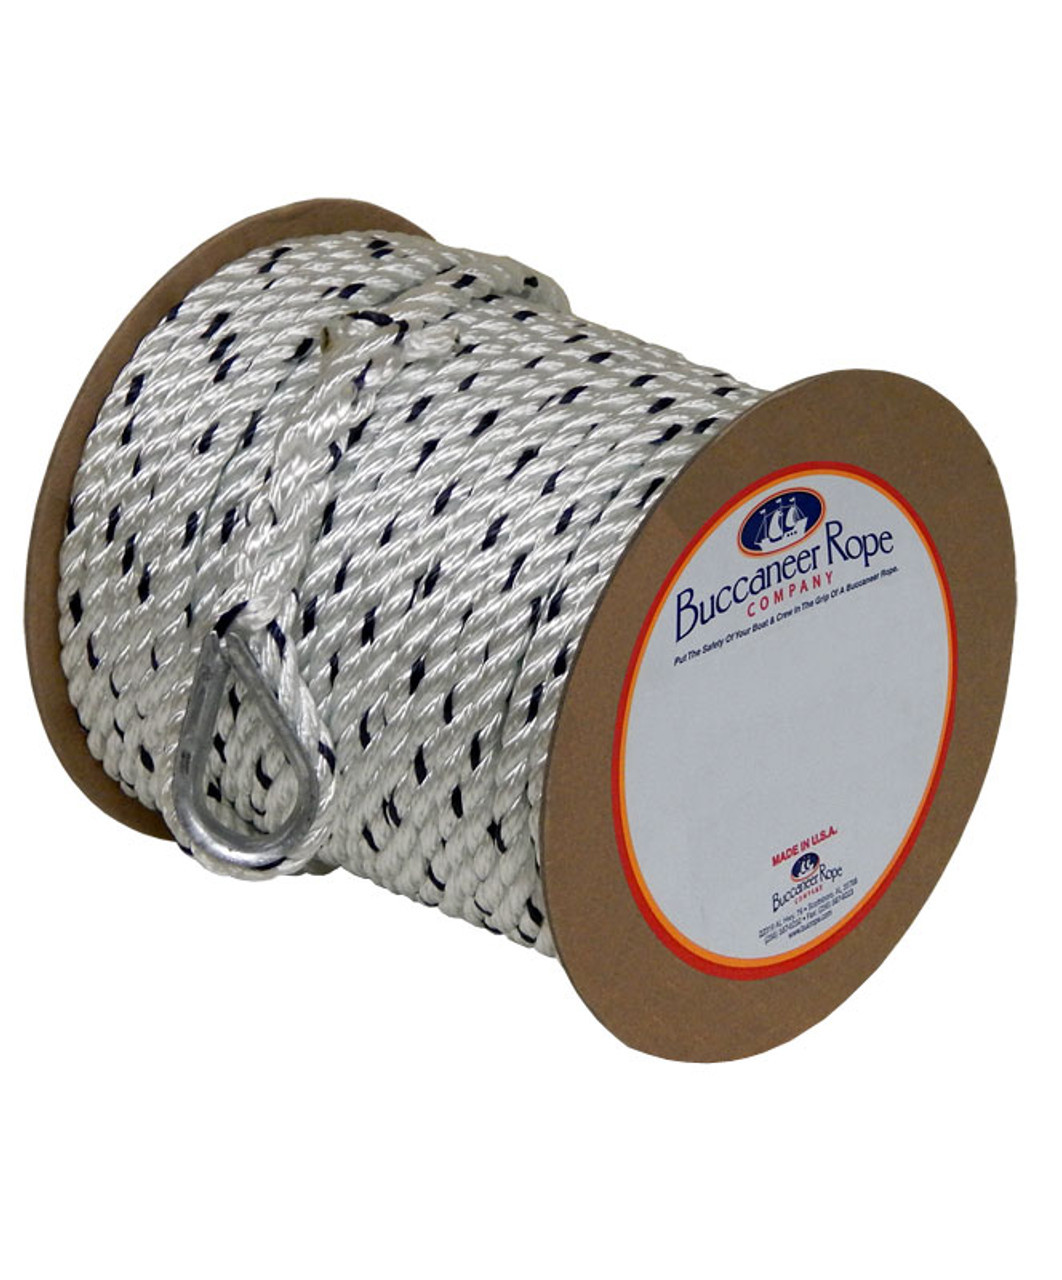 Buccaneer Rope 3/8 inch x 150 ft. White Twisted Nylon Anchor Rode PN 21-12150 MALAYSIA , INDONESIA , BRUNEI , SINGAPORE , THAILAND , VIETNAM , PHILIPPHINES , LAOS , CAMBODIA